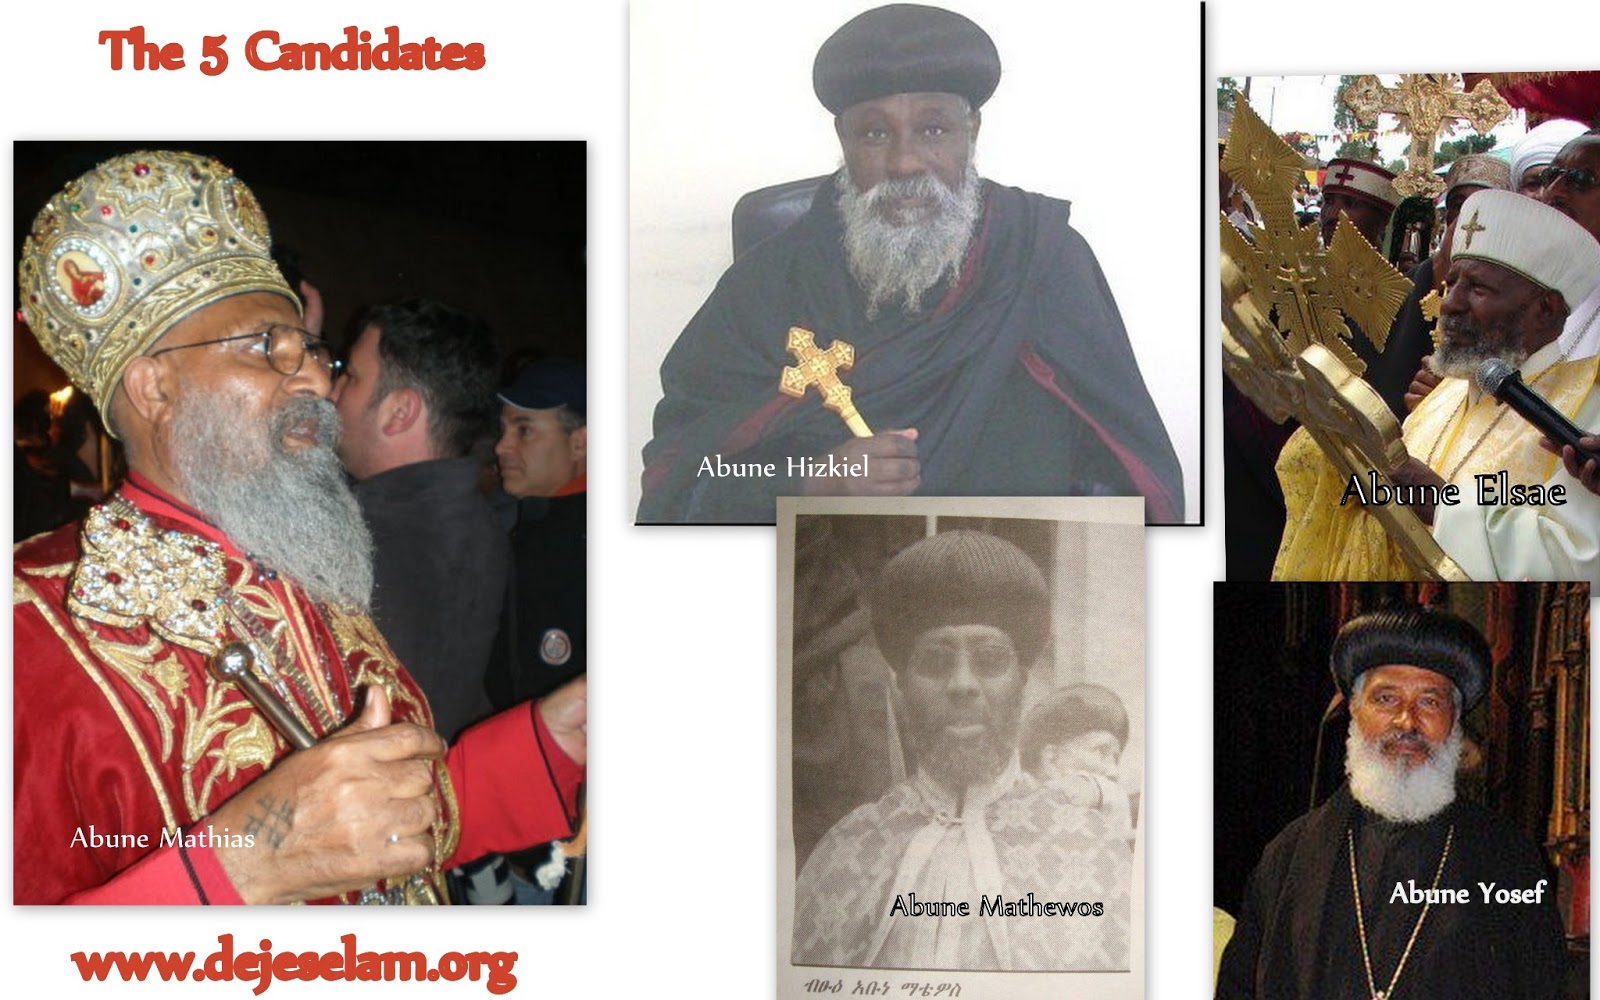 List of Five Candidates Announced for the Ethiopian Orthodox Patriarchal Throne